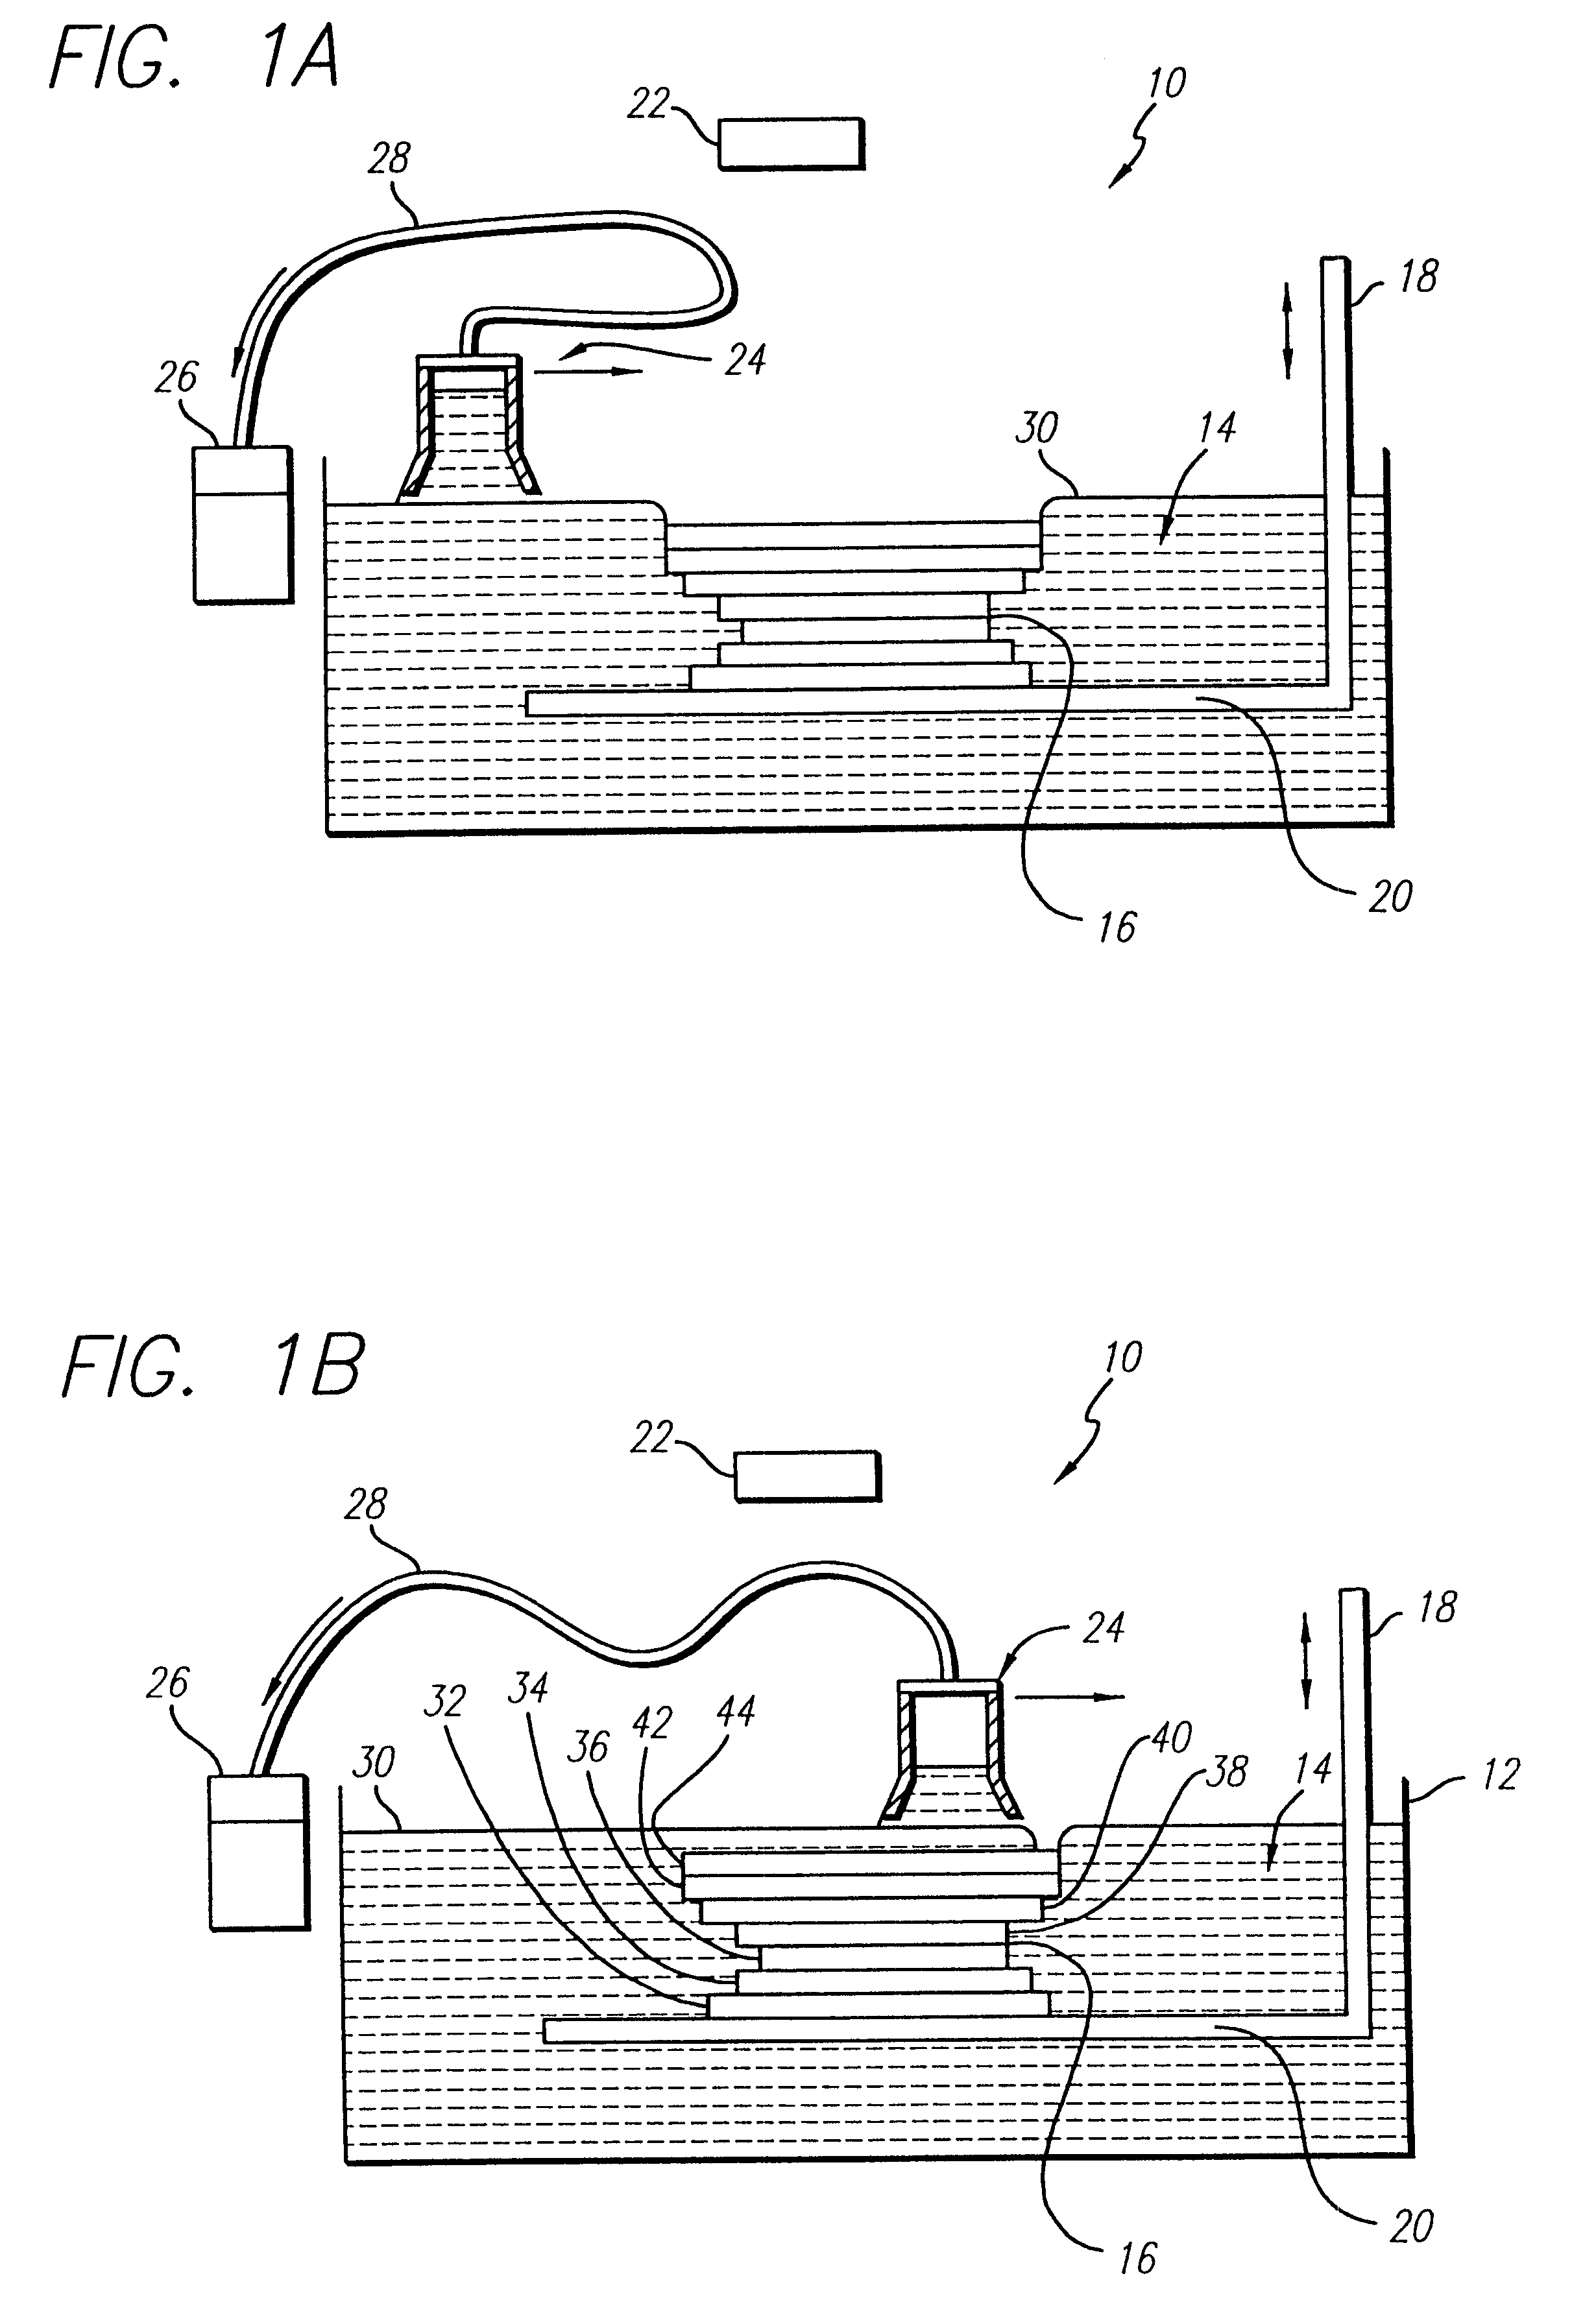 Method and apparatus for stereolithographically forming three dimensional objects with reduced distortion